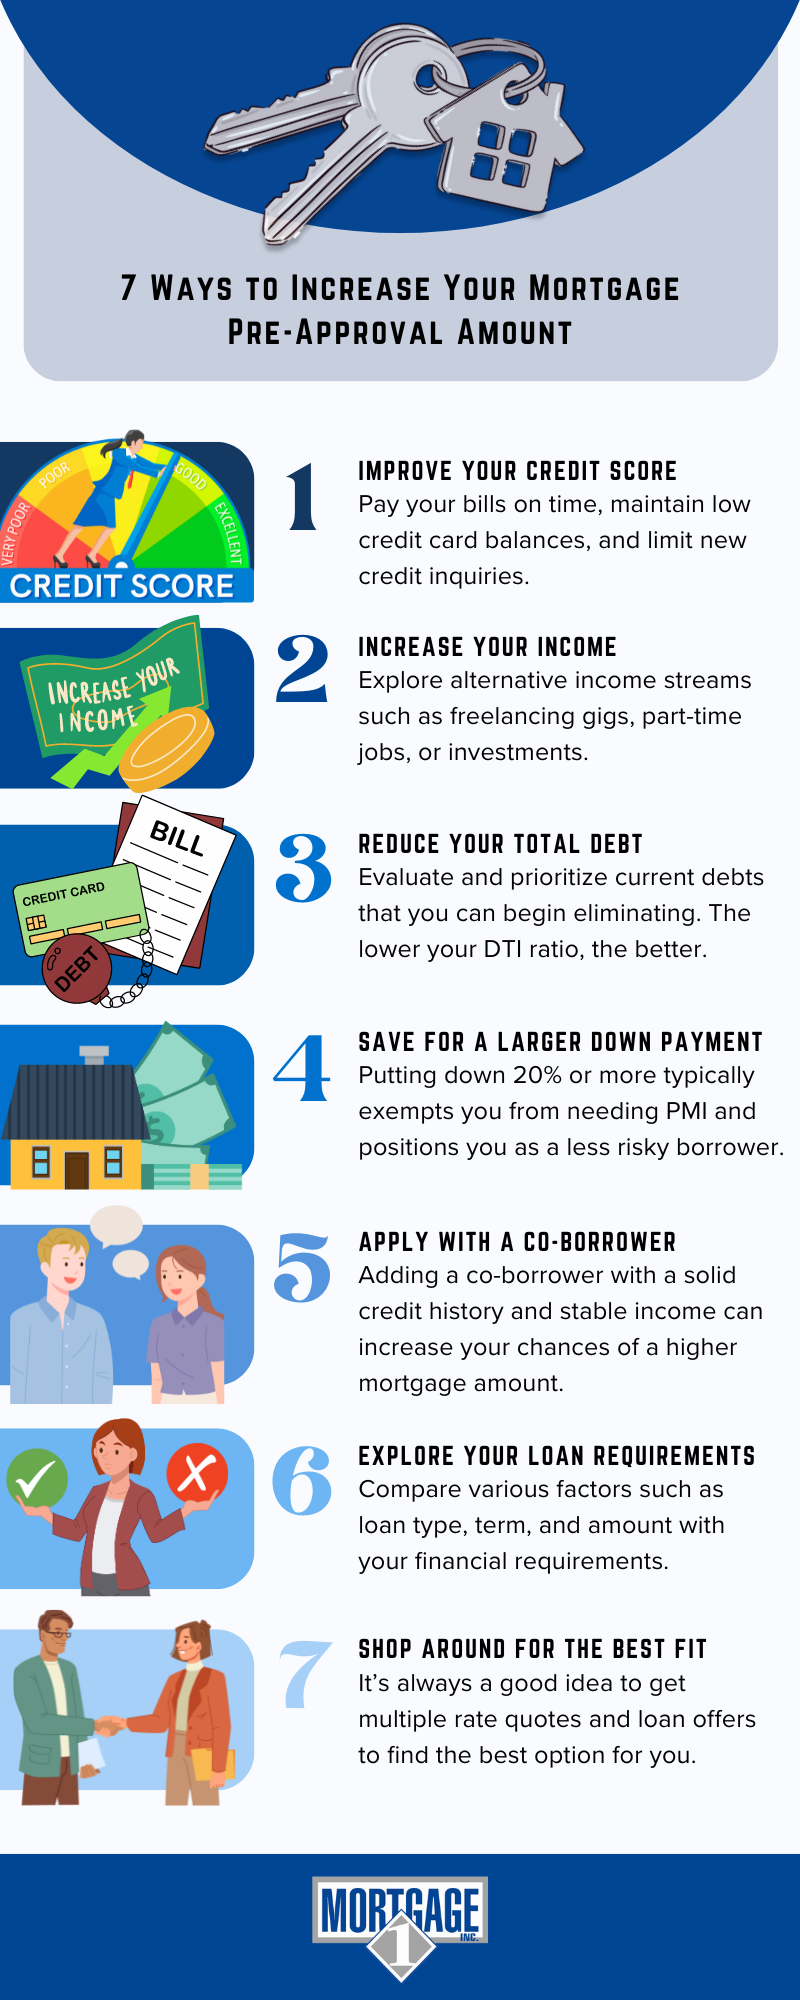 Ways to increase mortgage pre-approval amount infographic